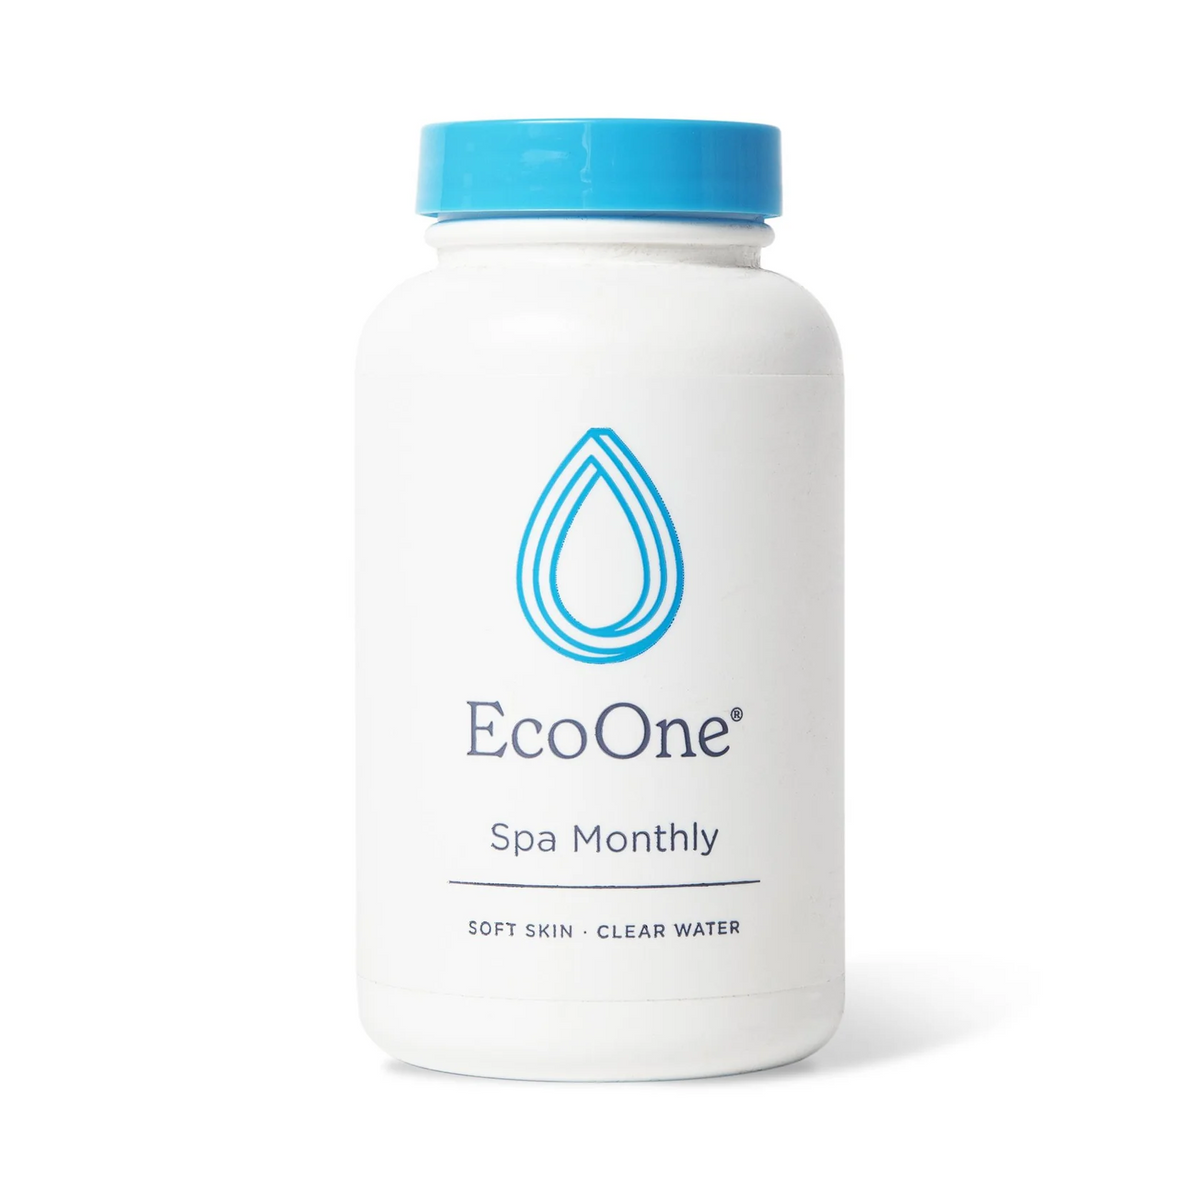 EcoOne Spa Monthly